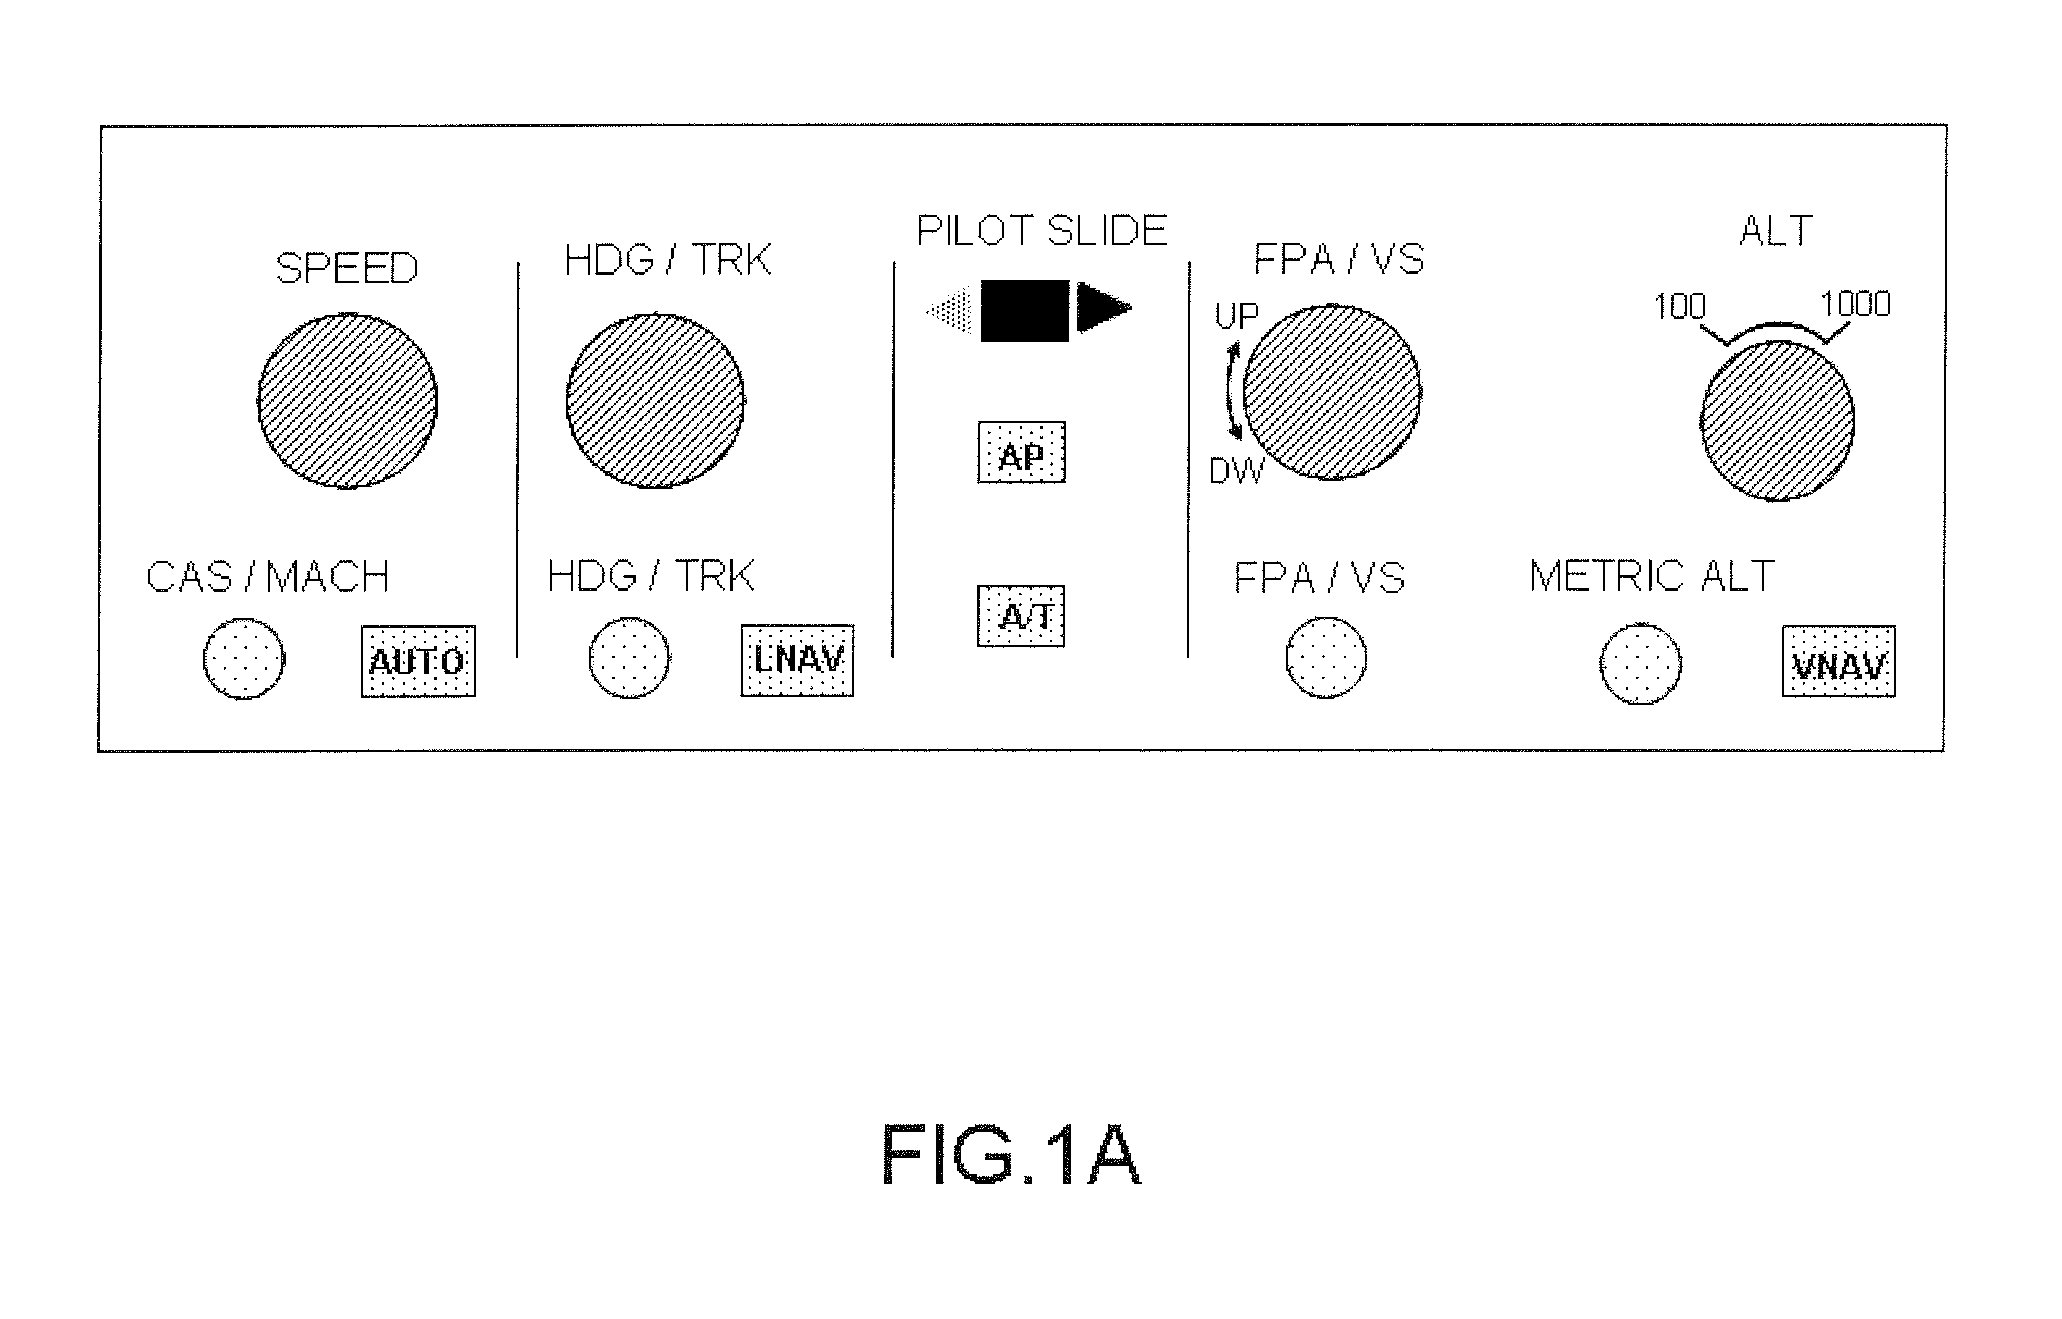 System for securing the display of instructions originating from air traffic control